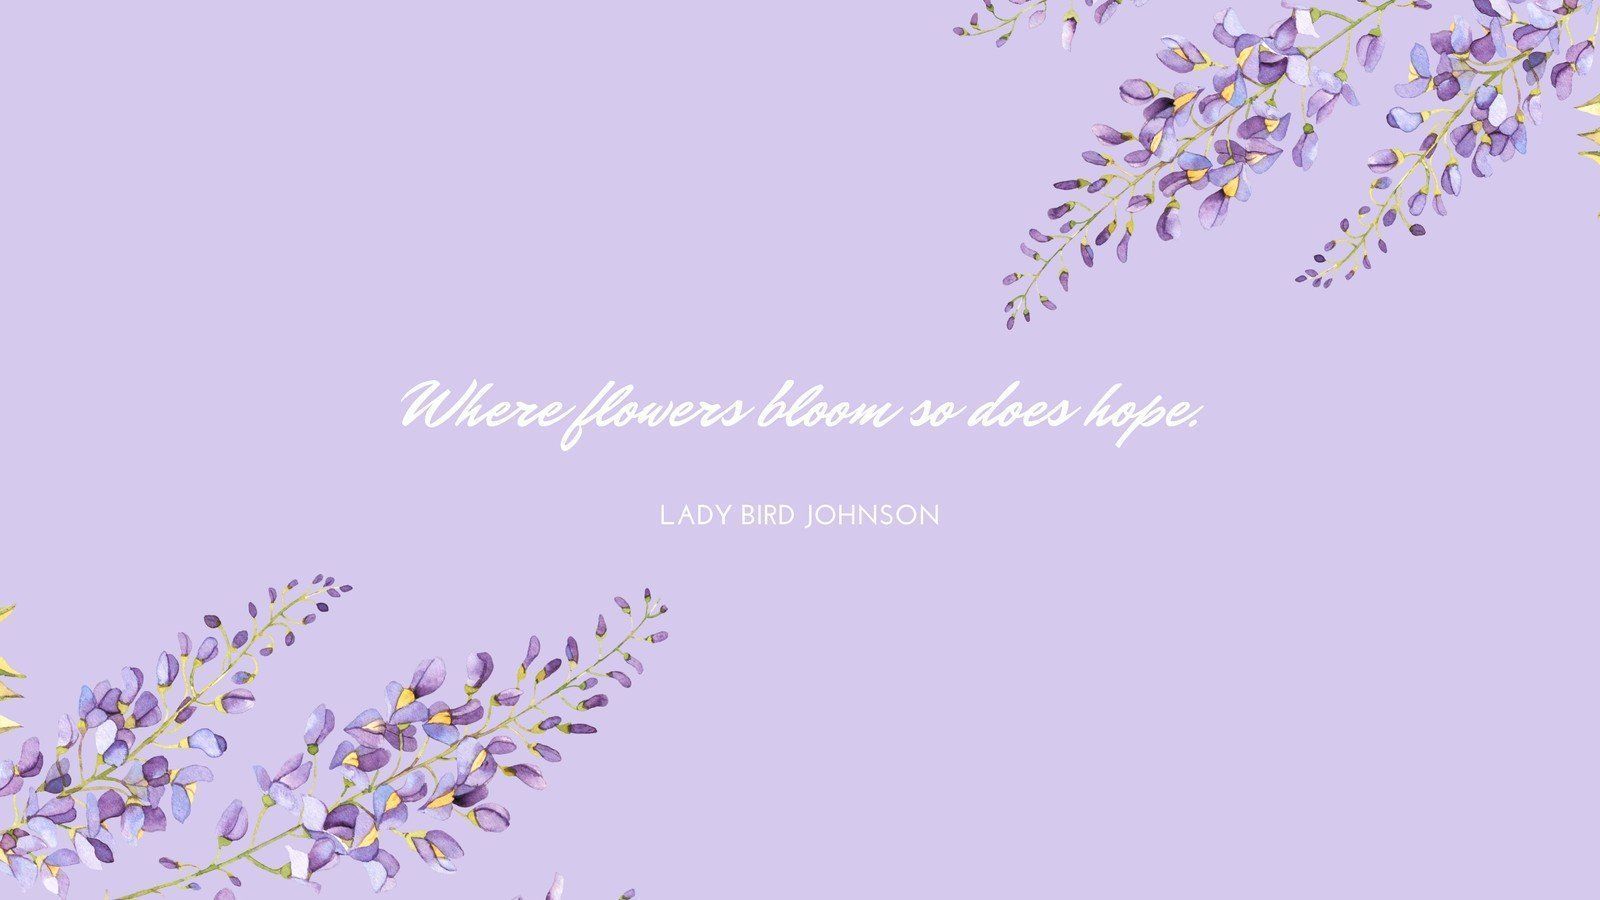 A purple background with a quote from Lady Bird Johnson, 